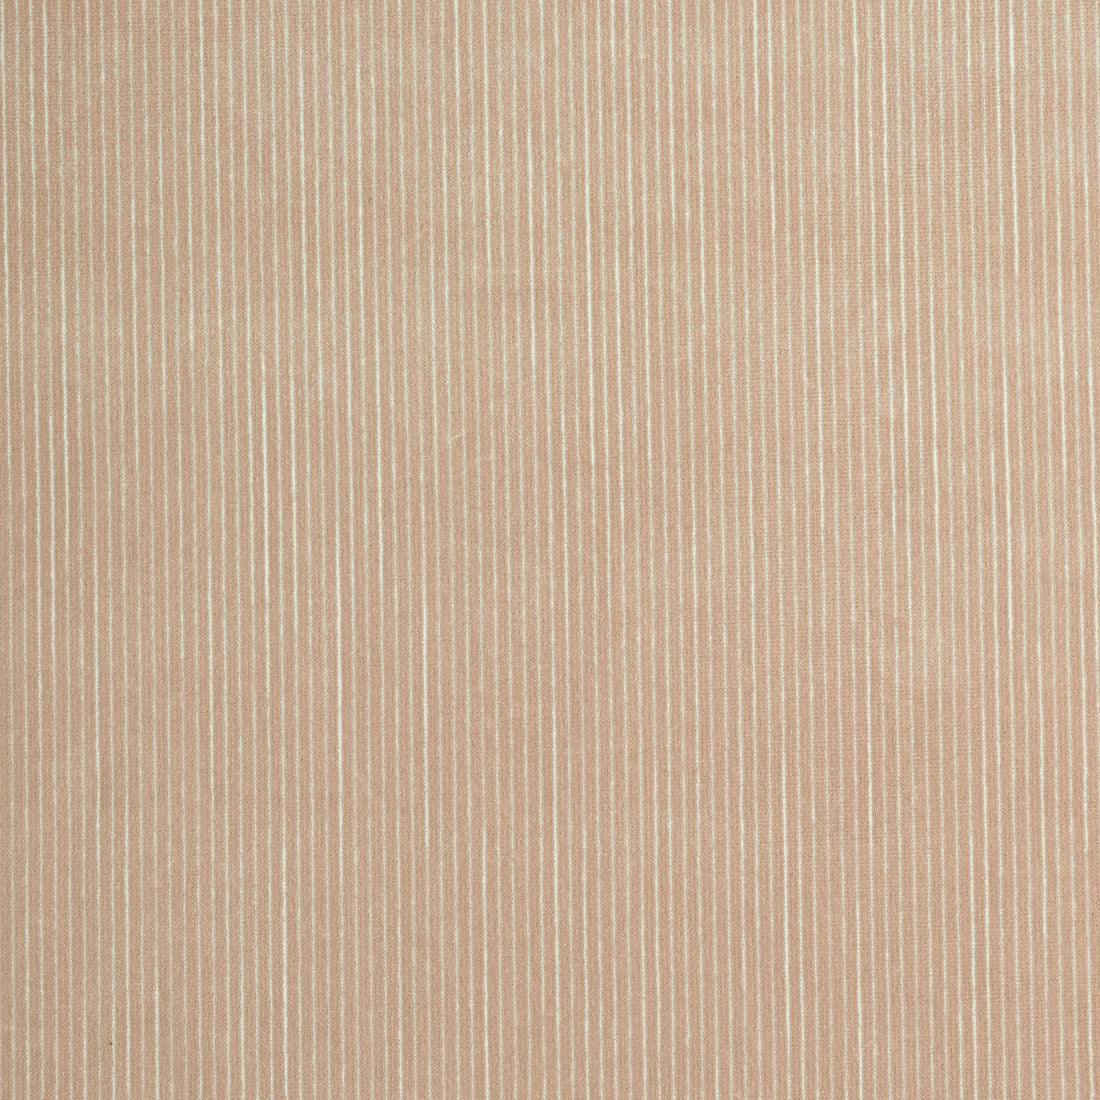 Fino Velvet fabric in cashmere color - pattern number W8149 - by Thibaut in the Sereno collection